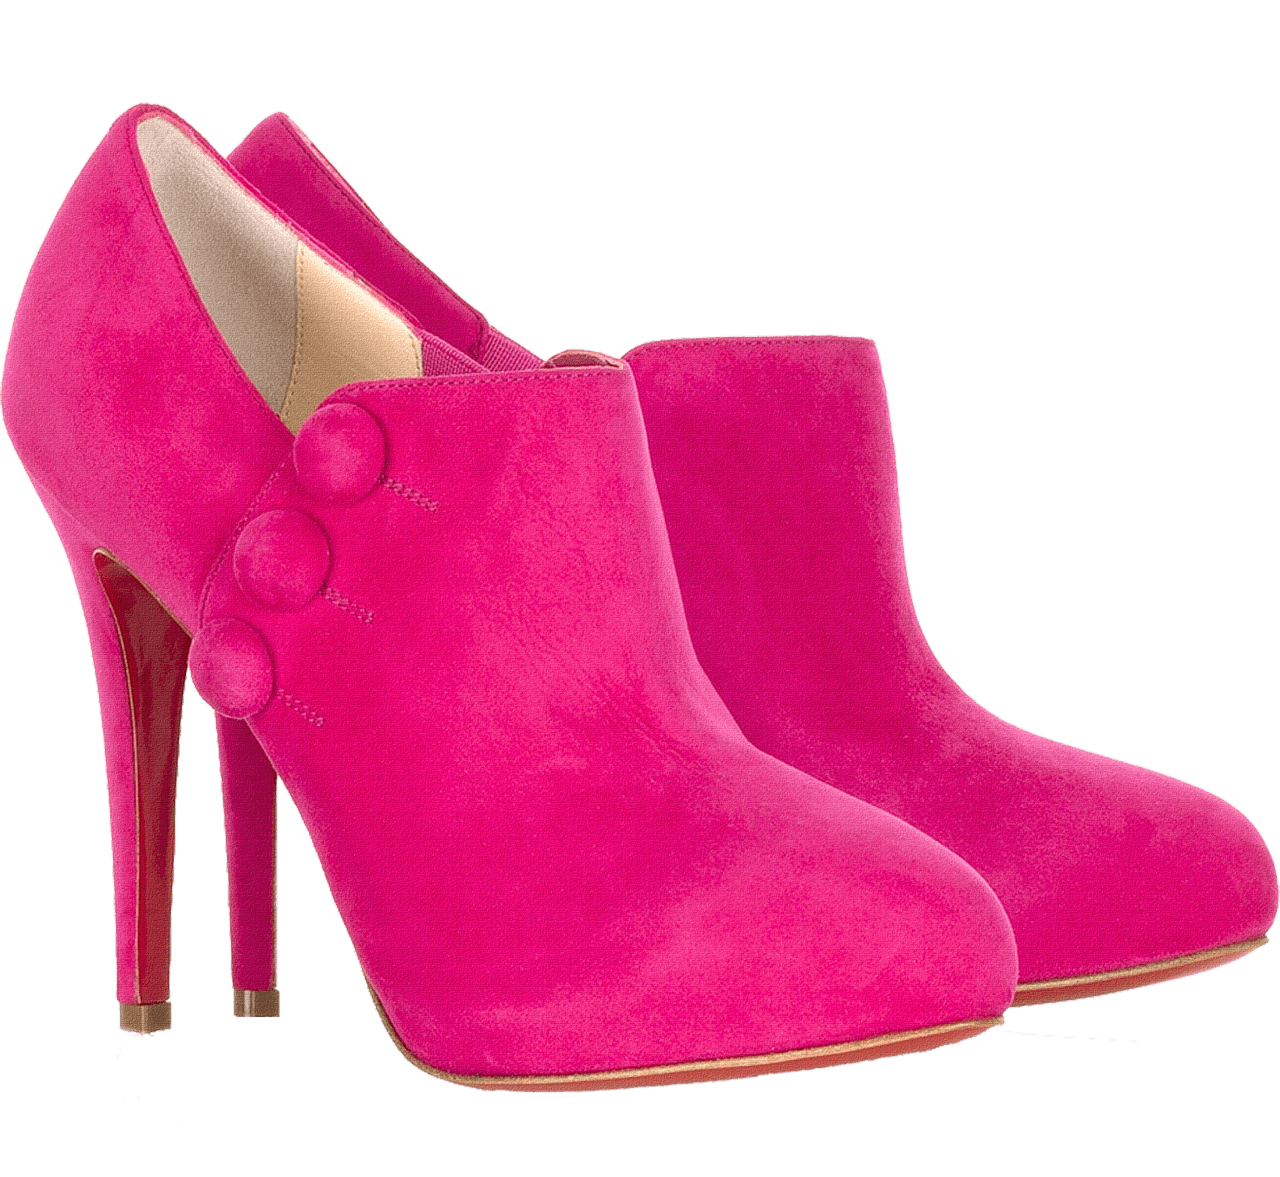 Women Shoes File PNG Image